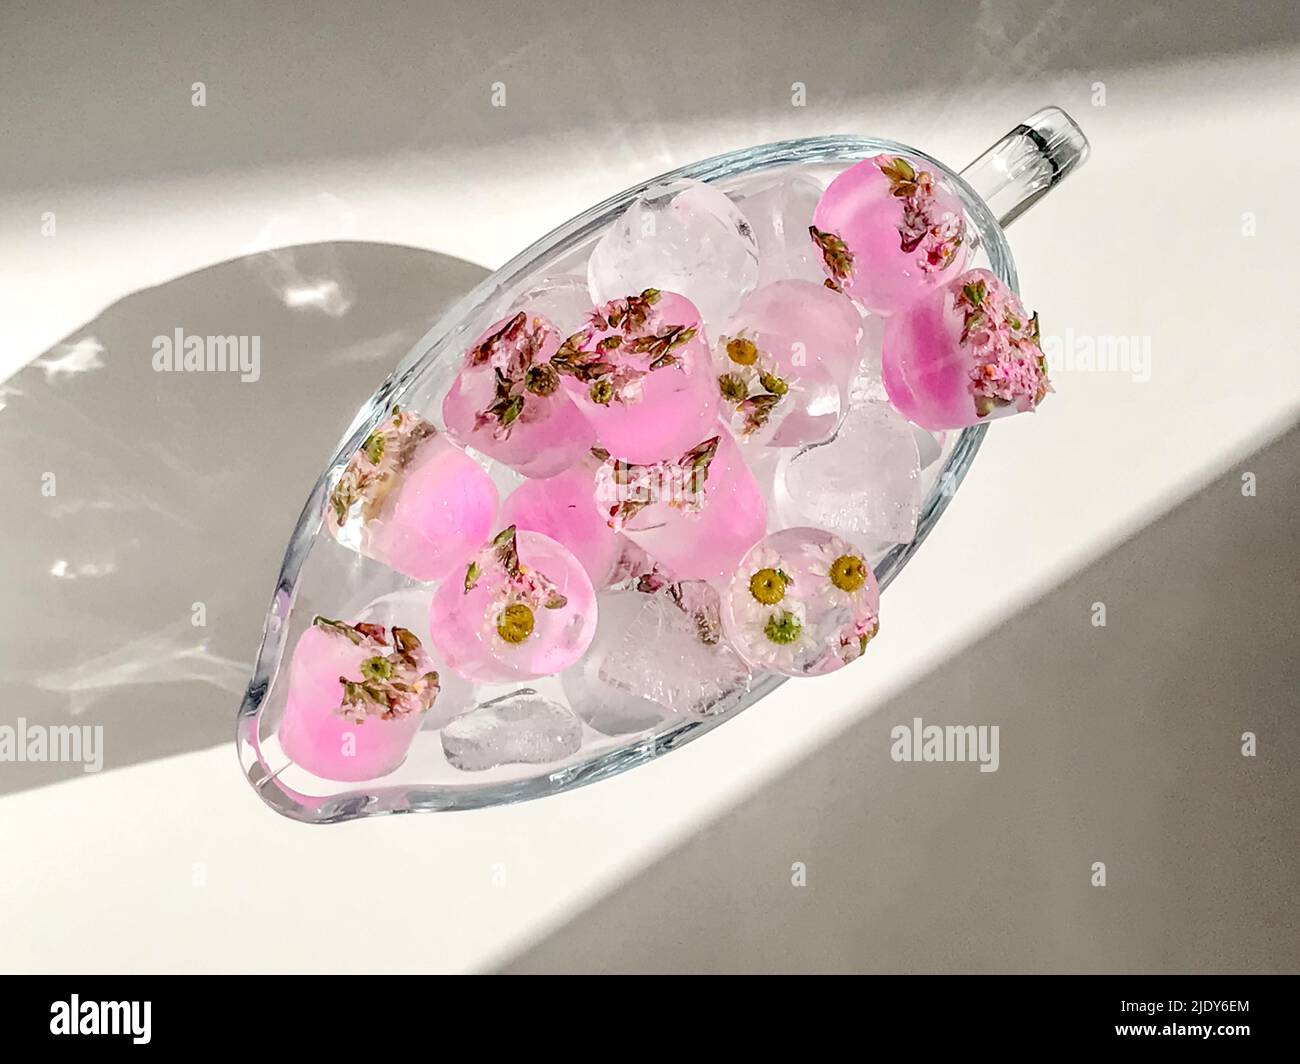 Vase with sumeer flower ice cubes Stock Photo